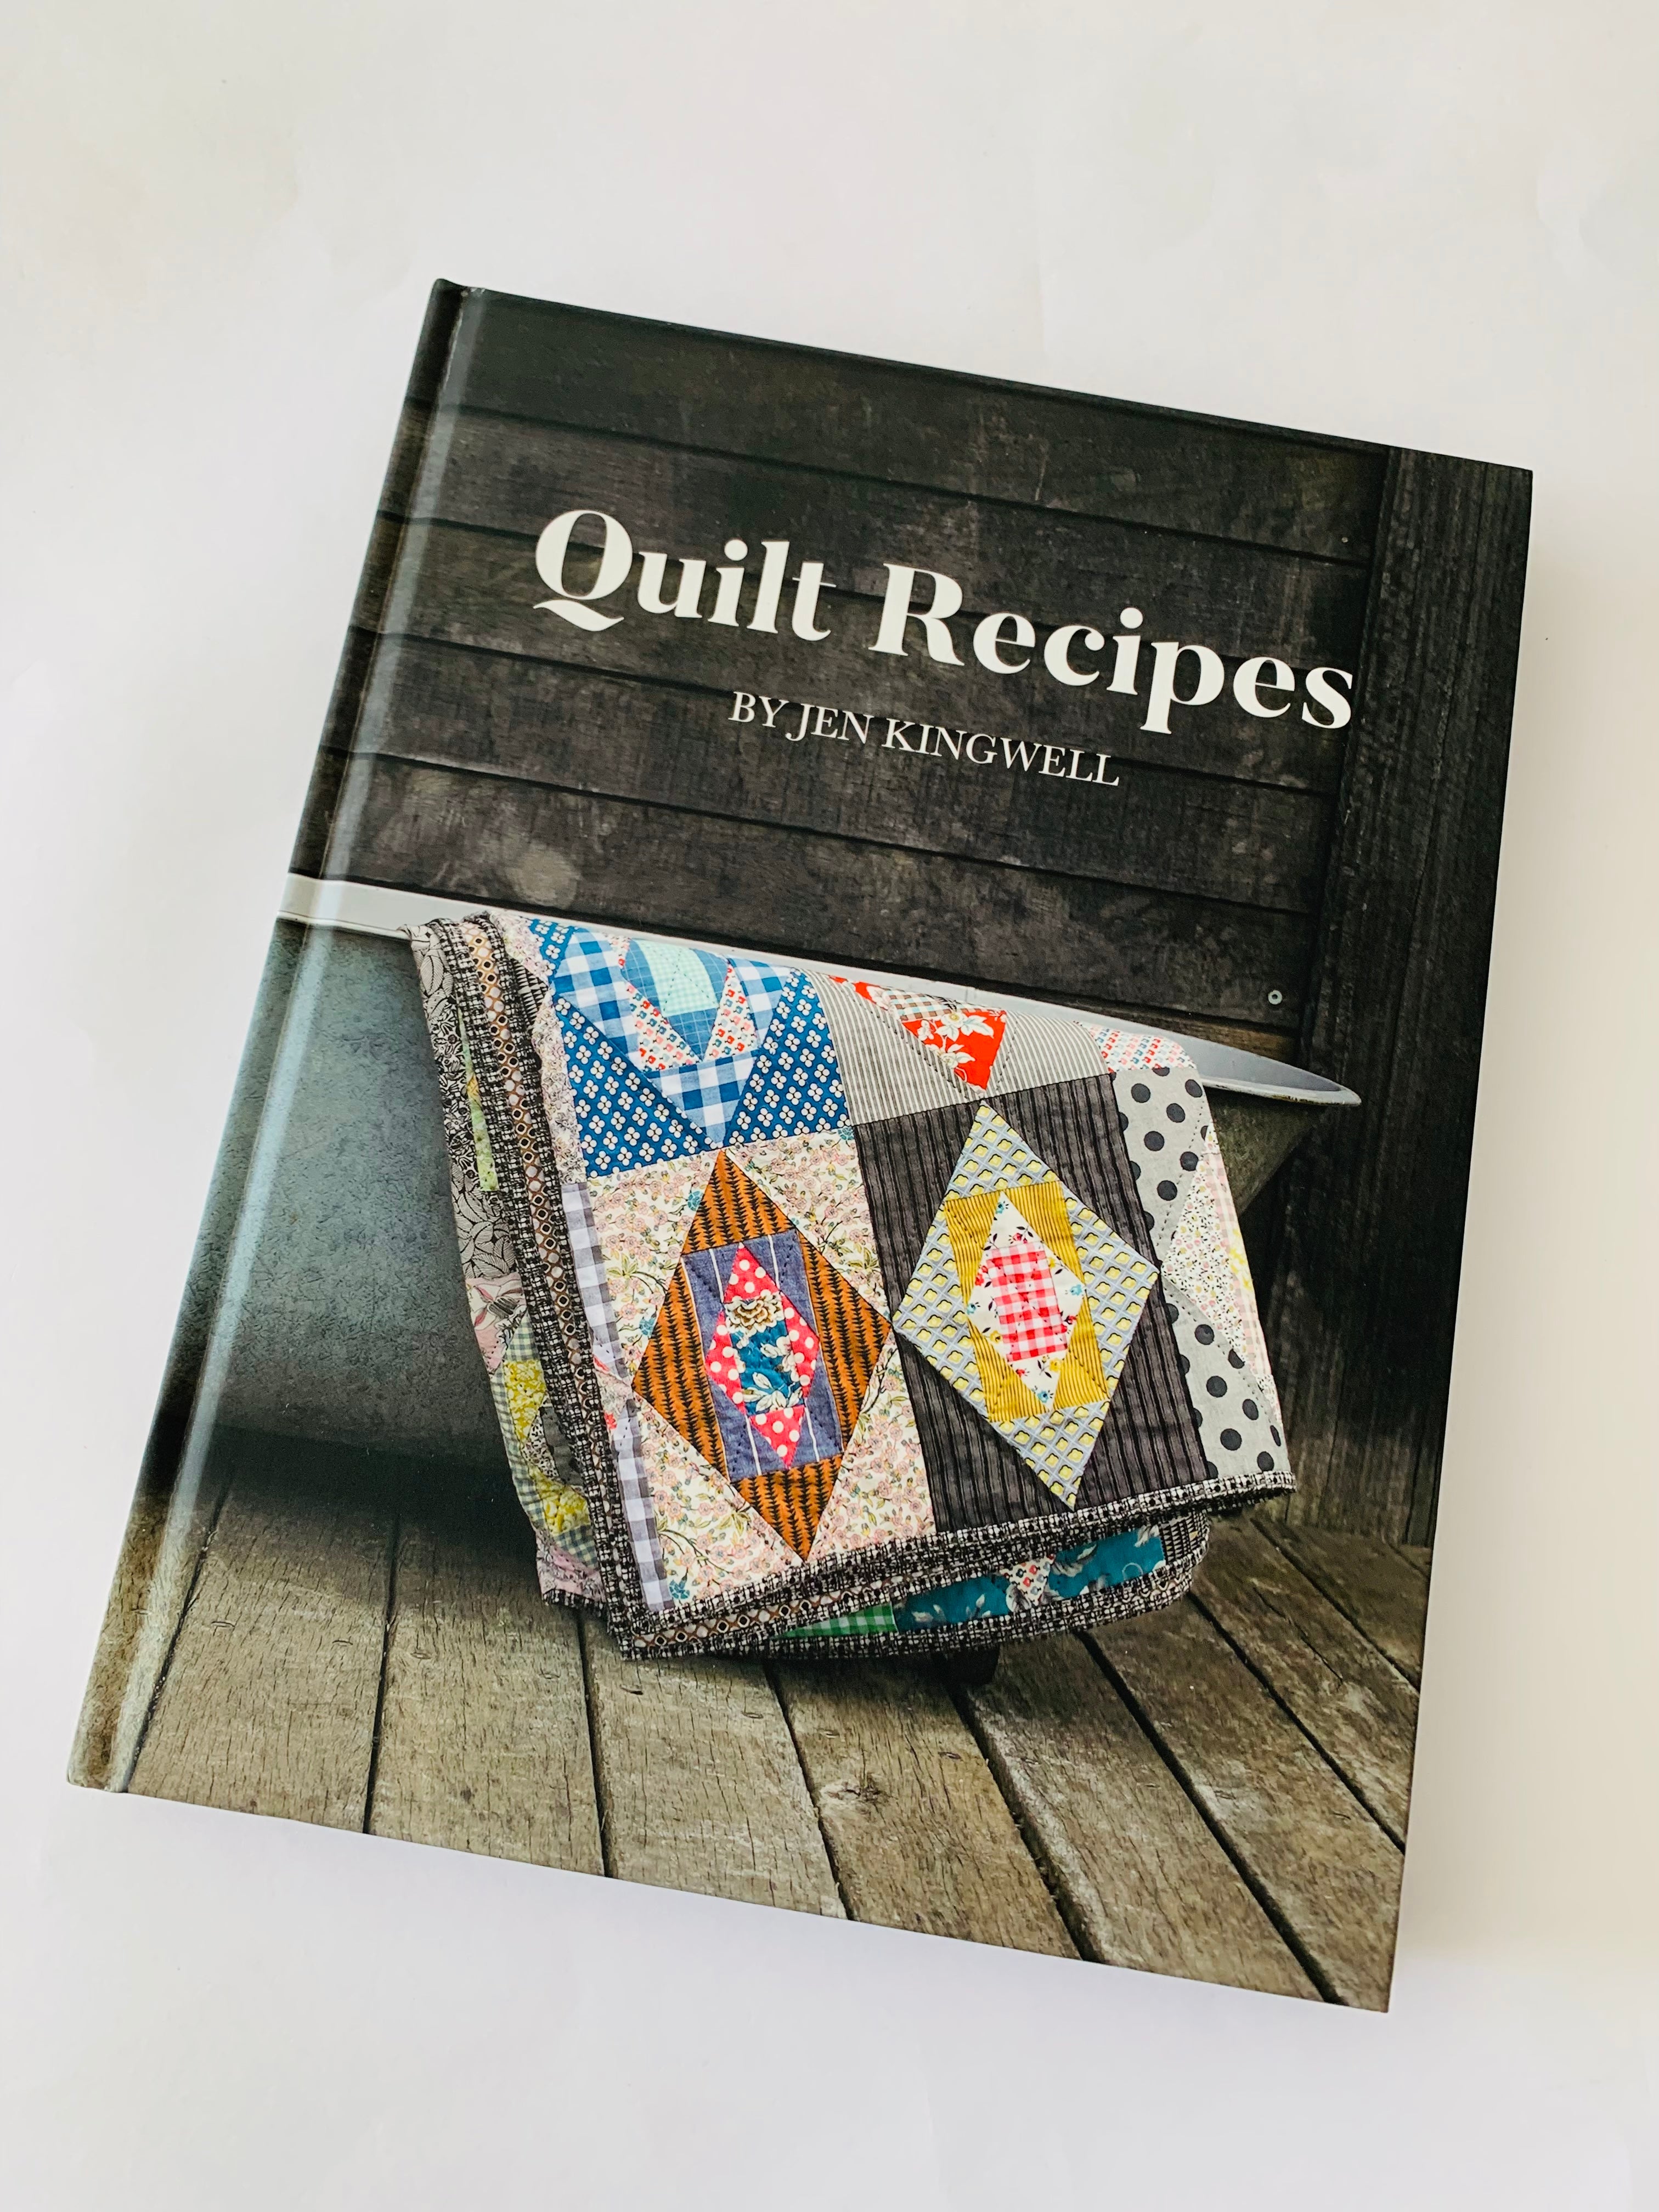 Quilt Recipes by Jen Kingwell book